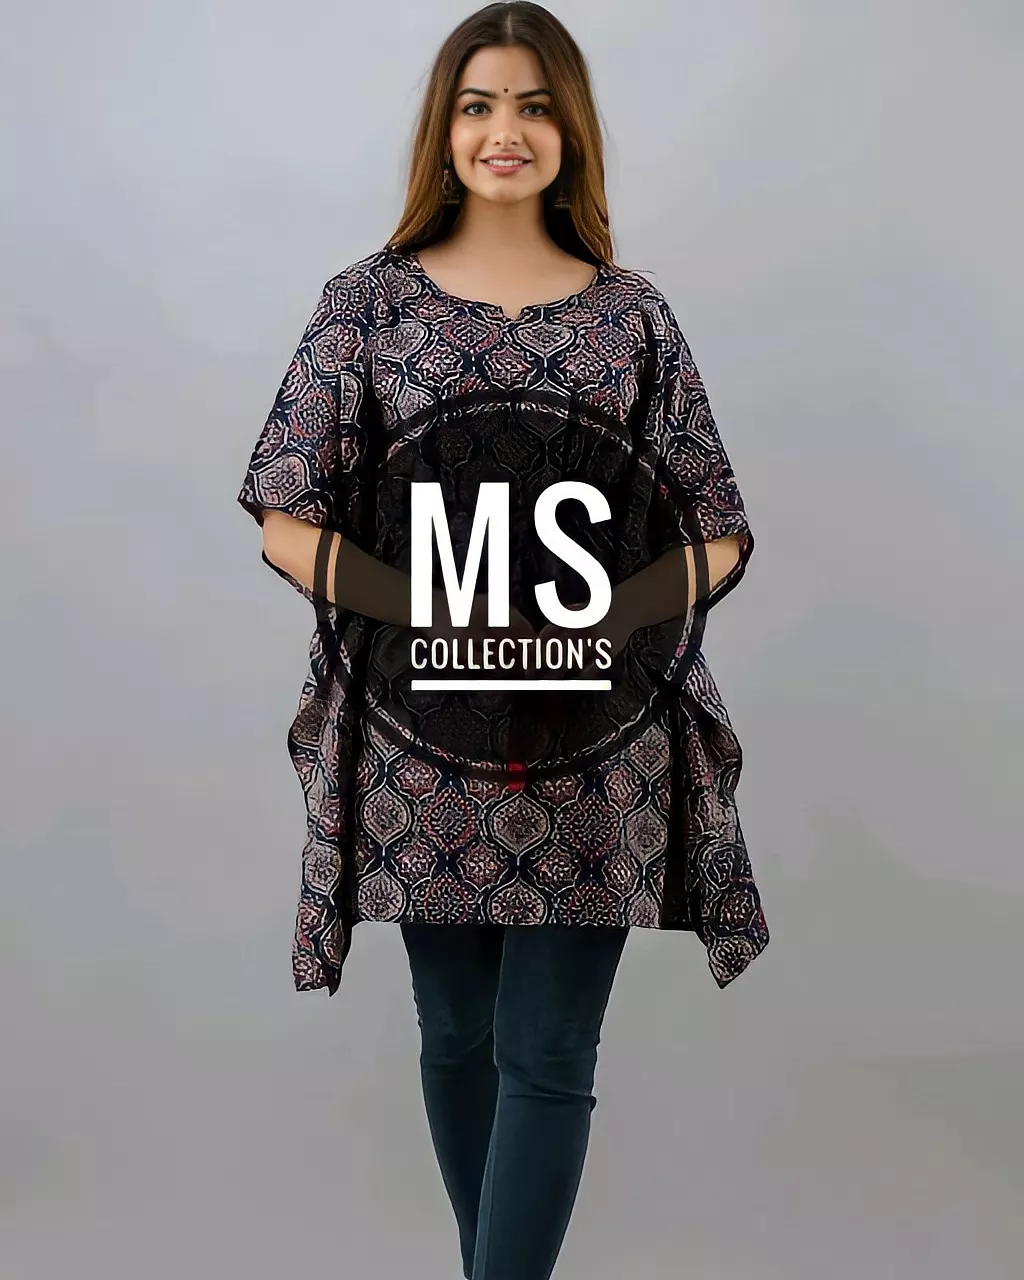 Post image *MS Collection's Present's*
*MS Code:-151*
*Fabric:- Cotton*
*Size Range Available*
*S To 2XL*
*At Affordable Price:-₹340*
*Free Shipping + Cash On Delivery Available*
*Regards MS Collection's*